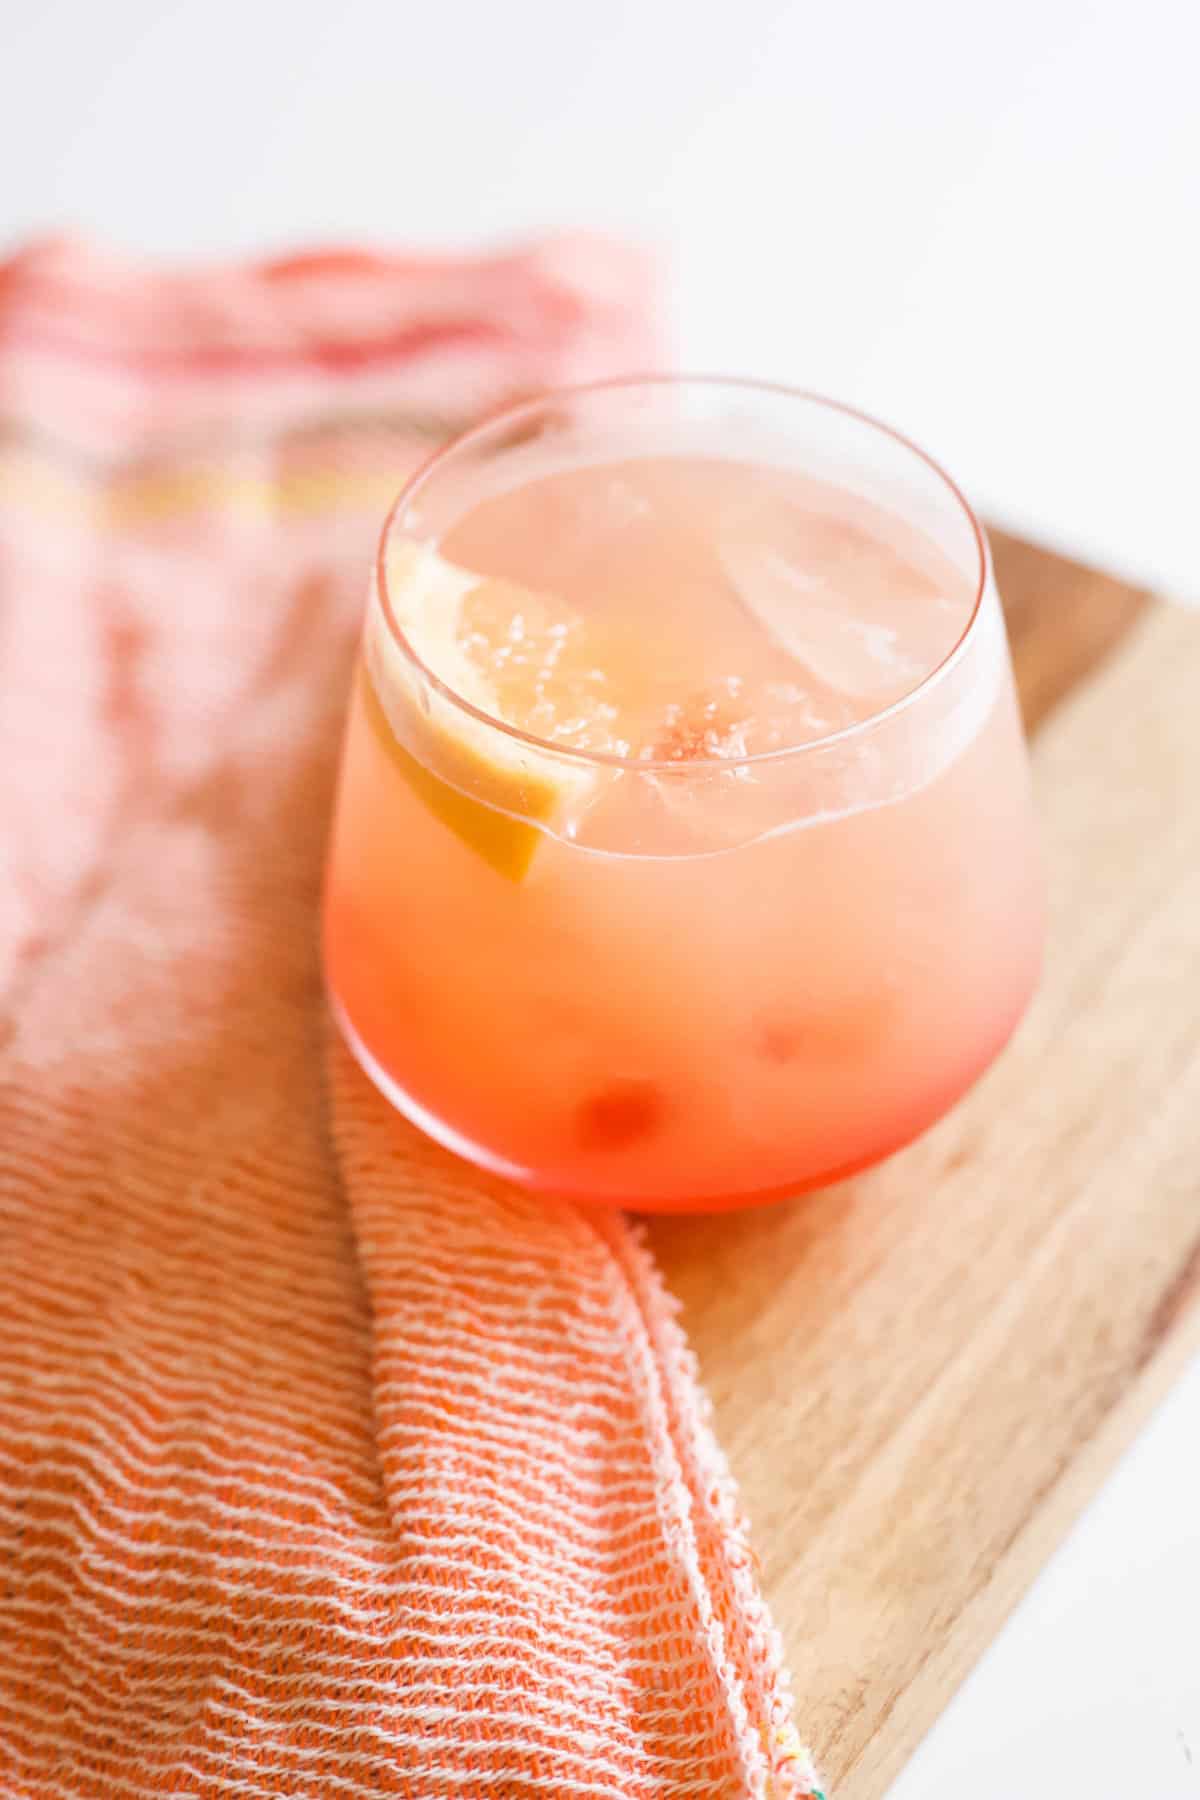 Grapefruit Sunrise cocktail in a short cocktail glass on a wood tray next to an orange fabric napkin.